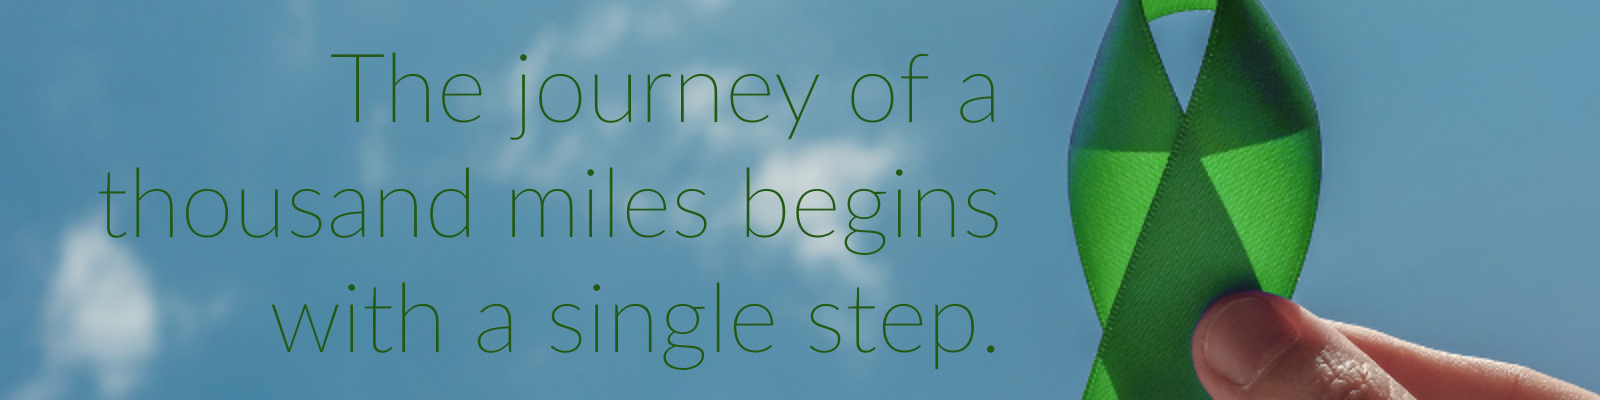 The journey of a thousand miles begins with a single step.